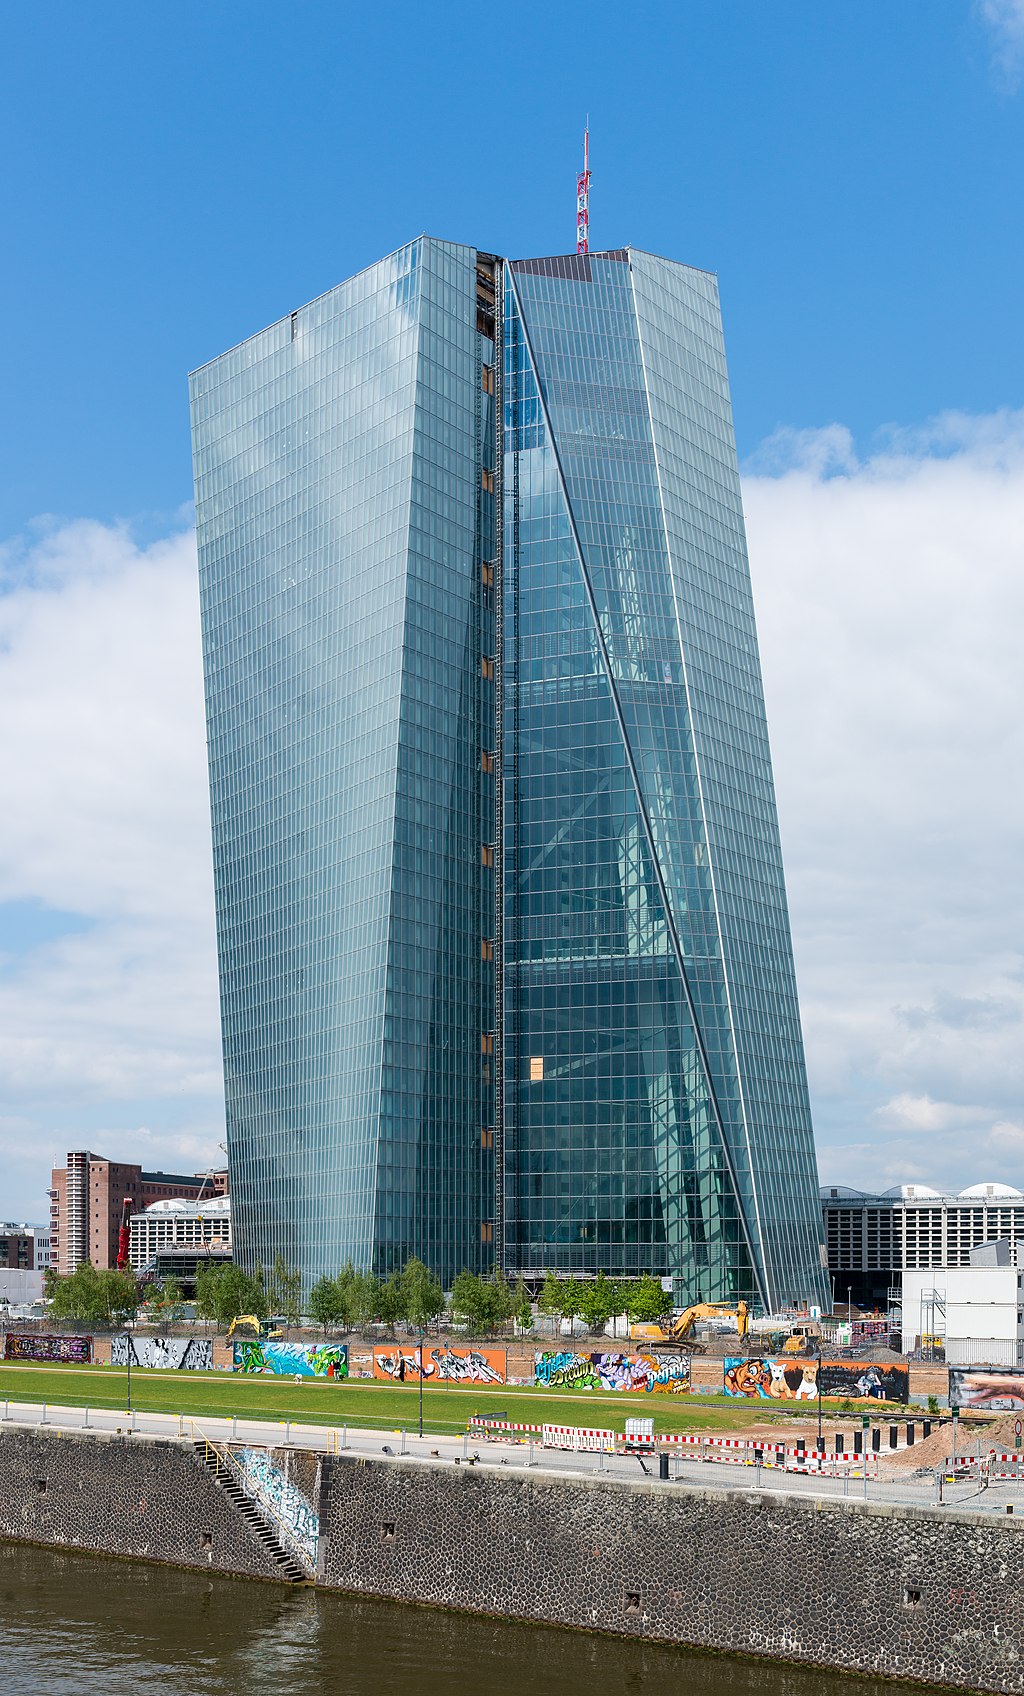 New building of the European Central Bank in Frankfurt Main, Germany|  Photo taken by Norbert Nagel / Wikimedia Commons | License: Creative Commons Attribution - ShareAlike 3.0 Unported